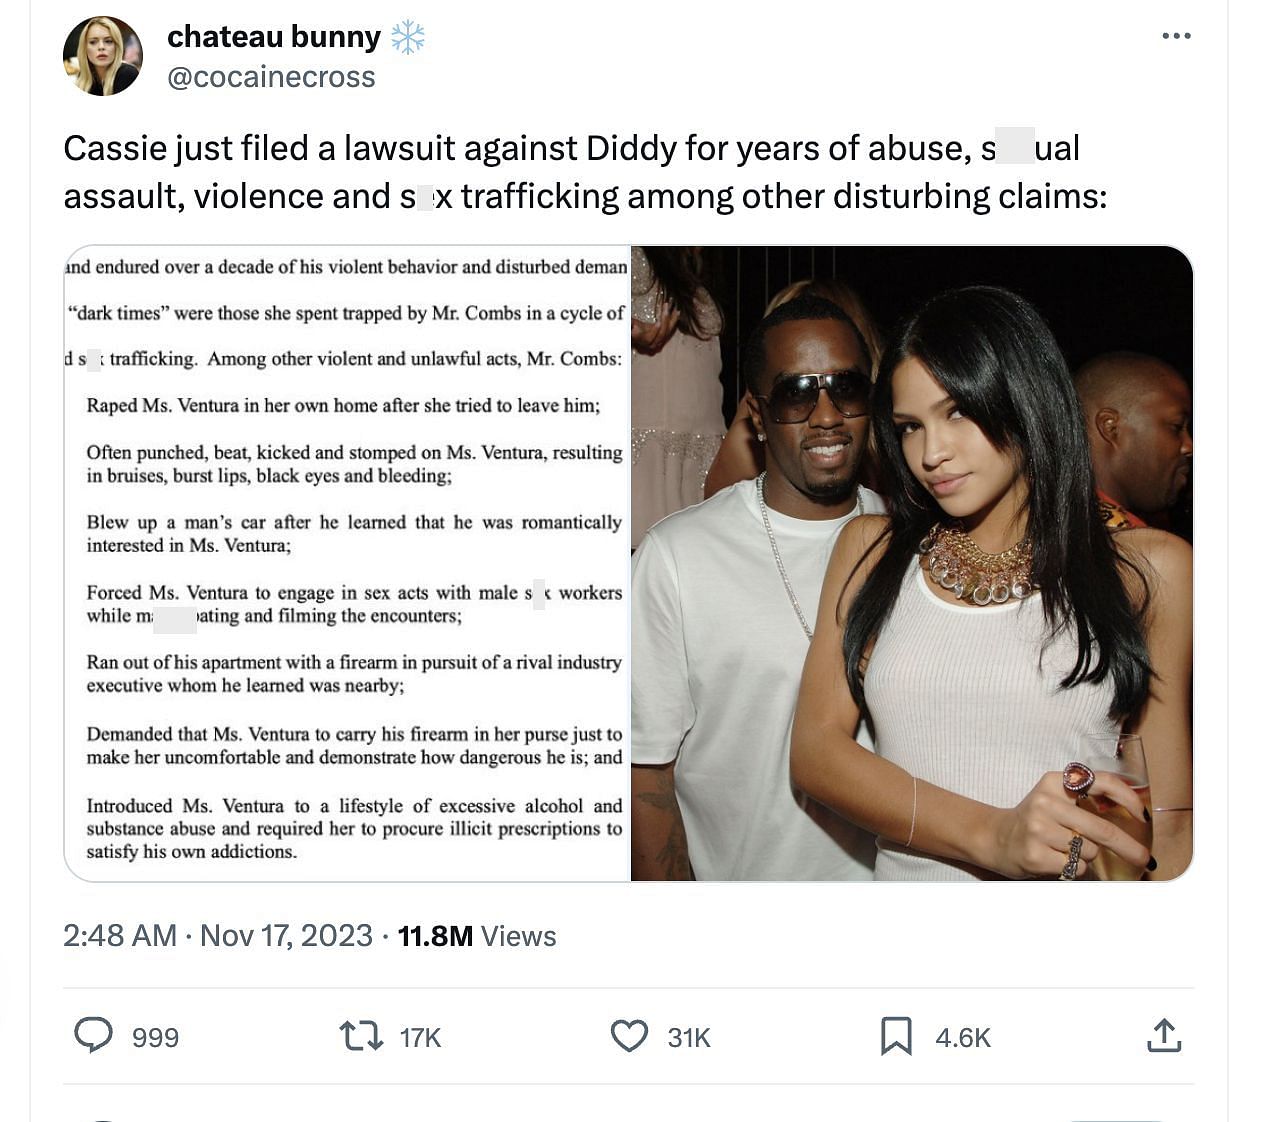 Details revealed about the model&#039;s relationship with Diddy as the lawsuit creates a rage amongst the social media users. (Image via Twitter)